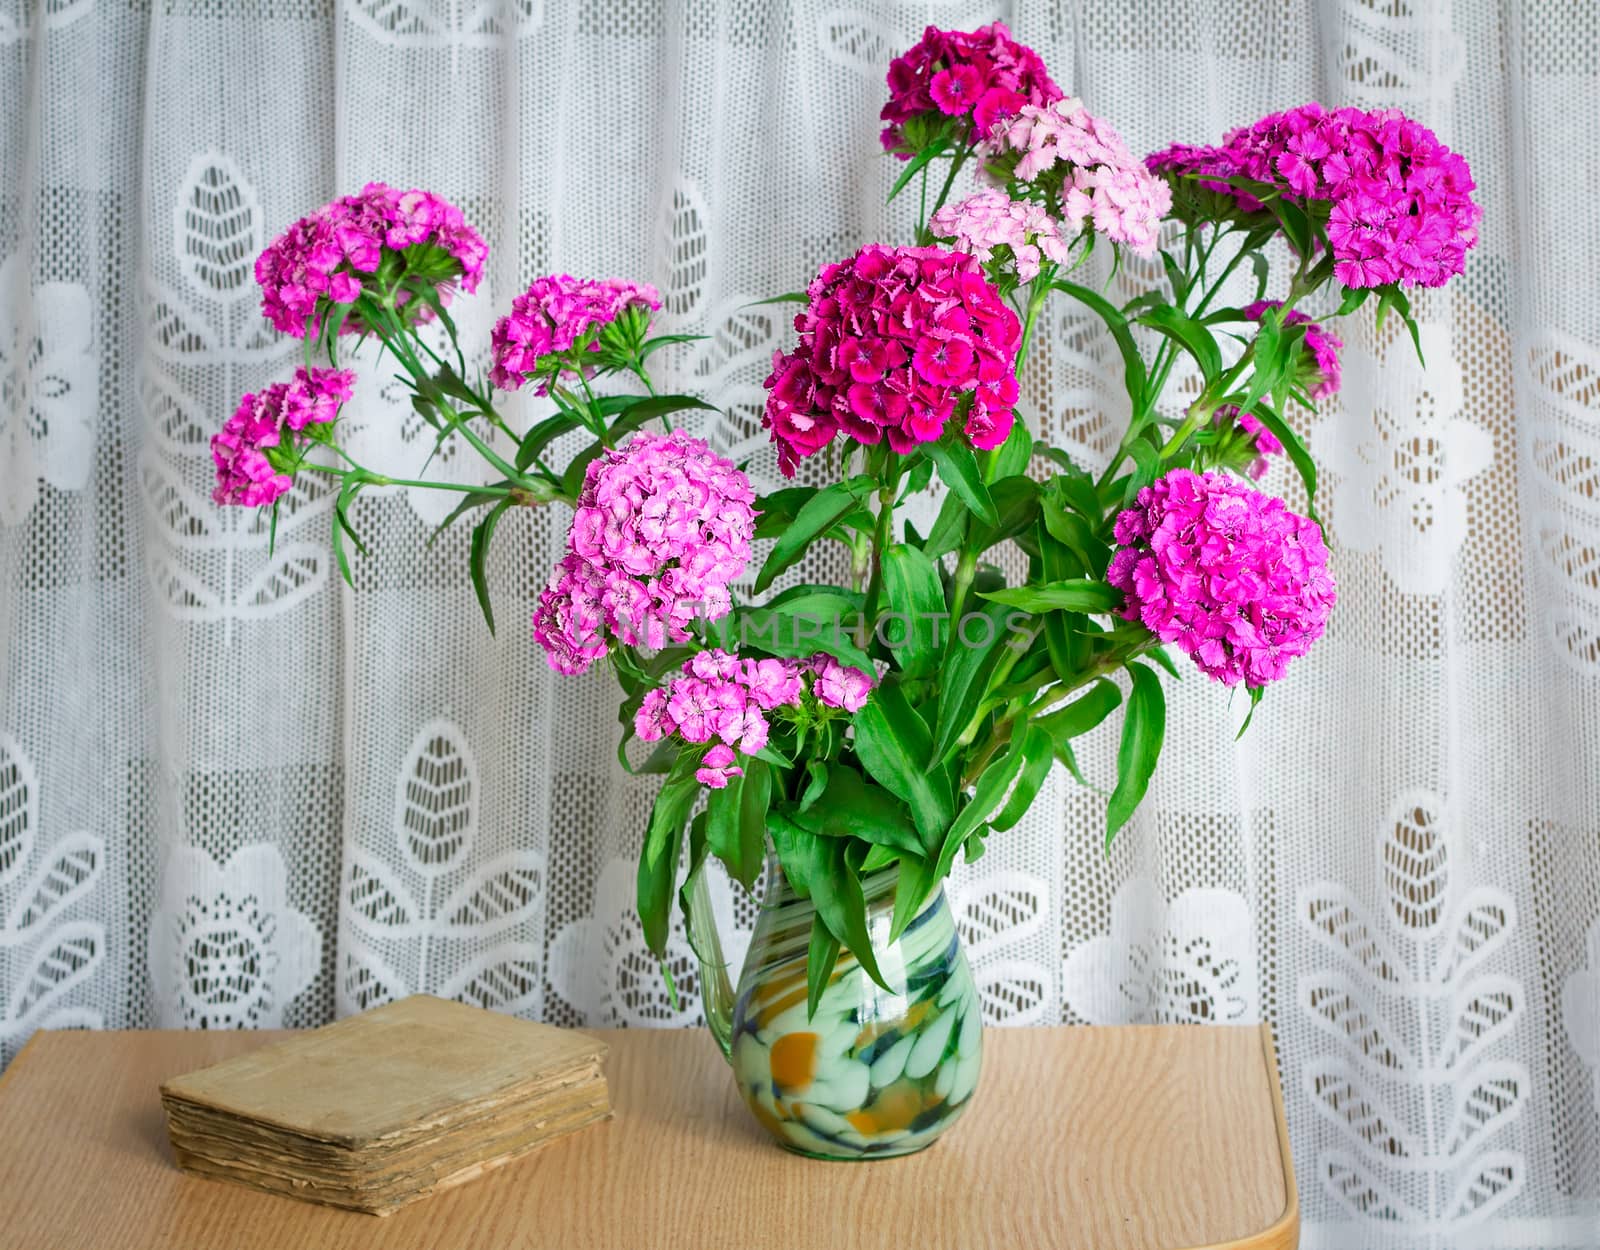  Still life: a beautiful bright pink and red flowers carnations in a glass vase on the table next to the old book.